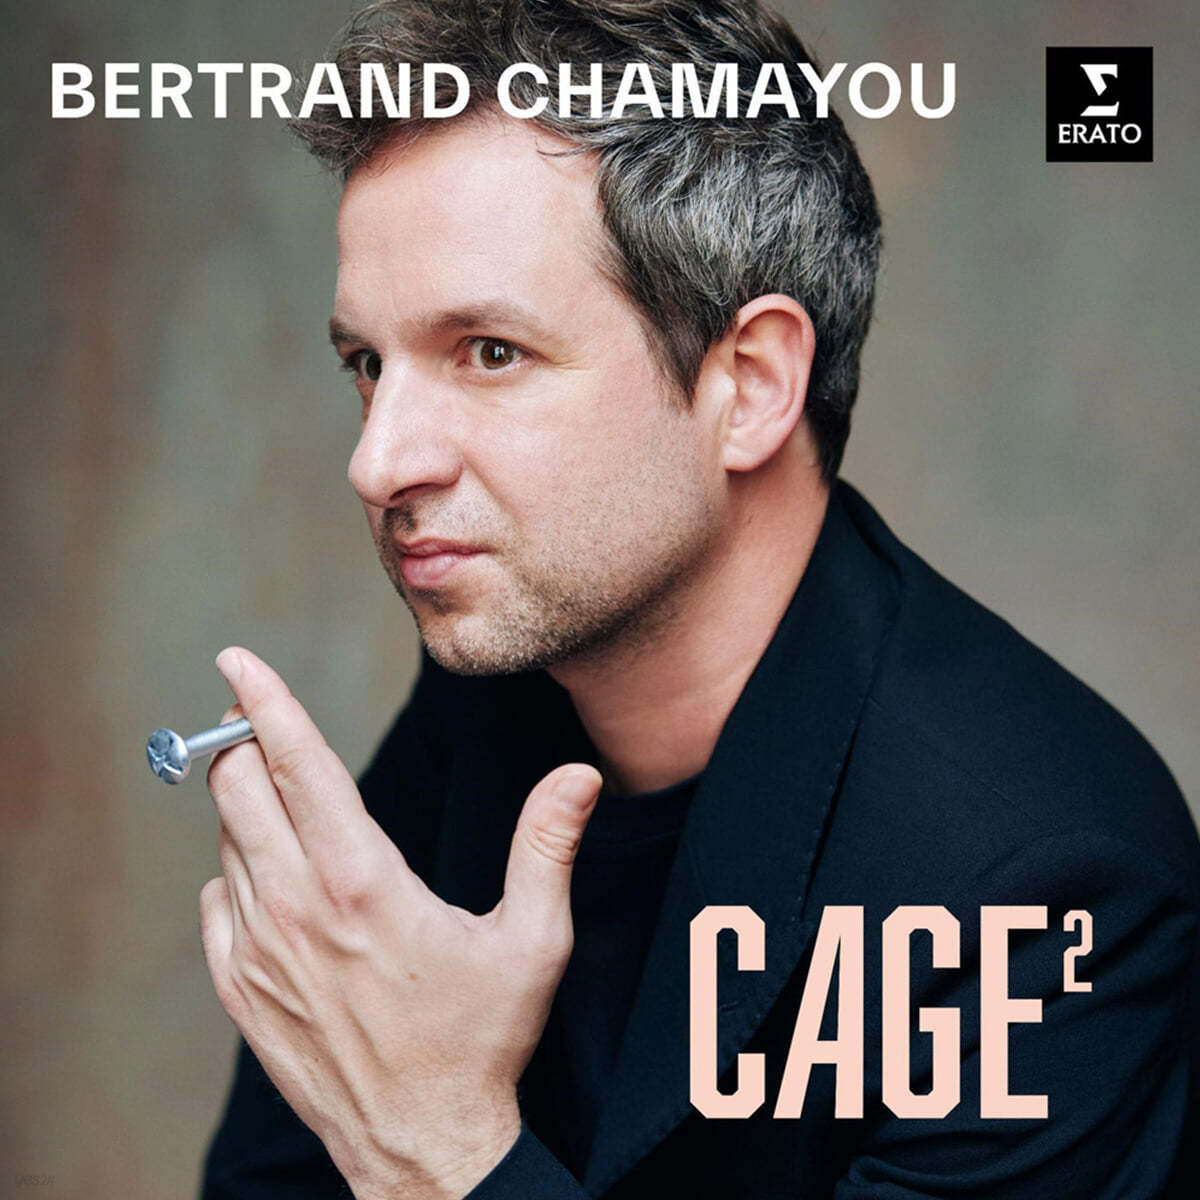 Bertrand Chamayou 존 케이지 2 (Cage&#178;)